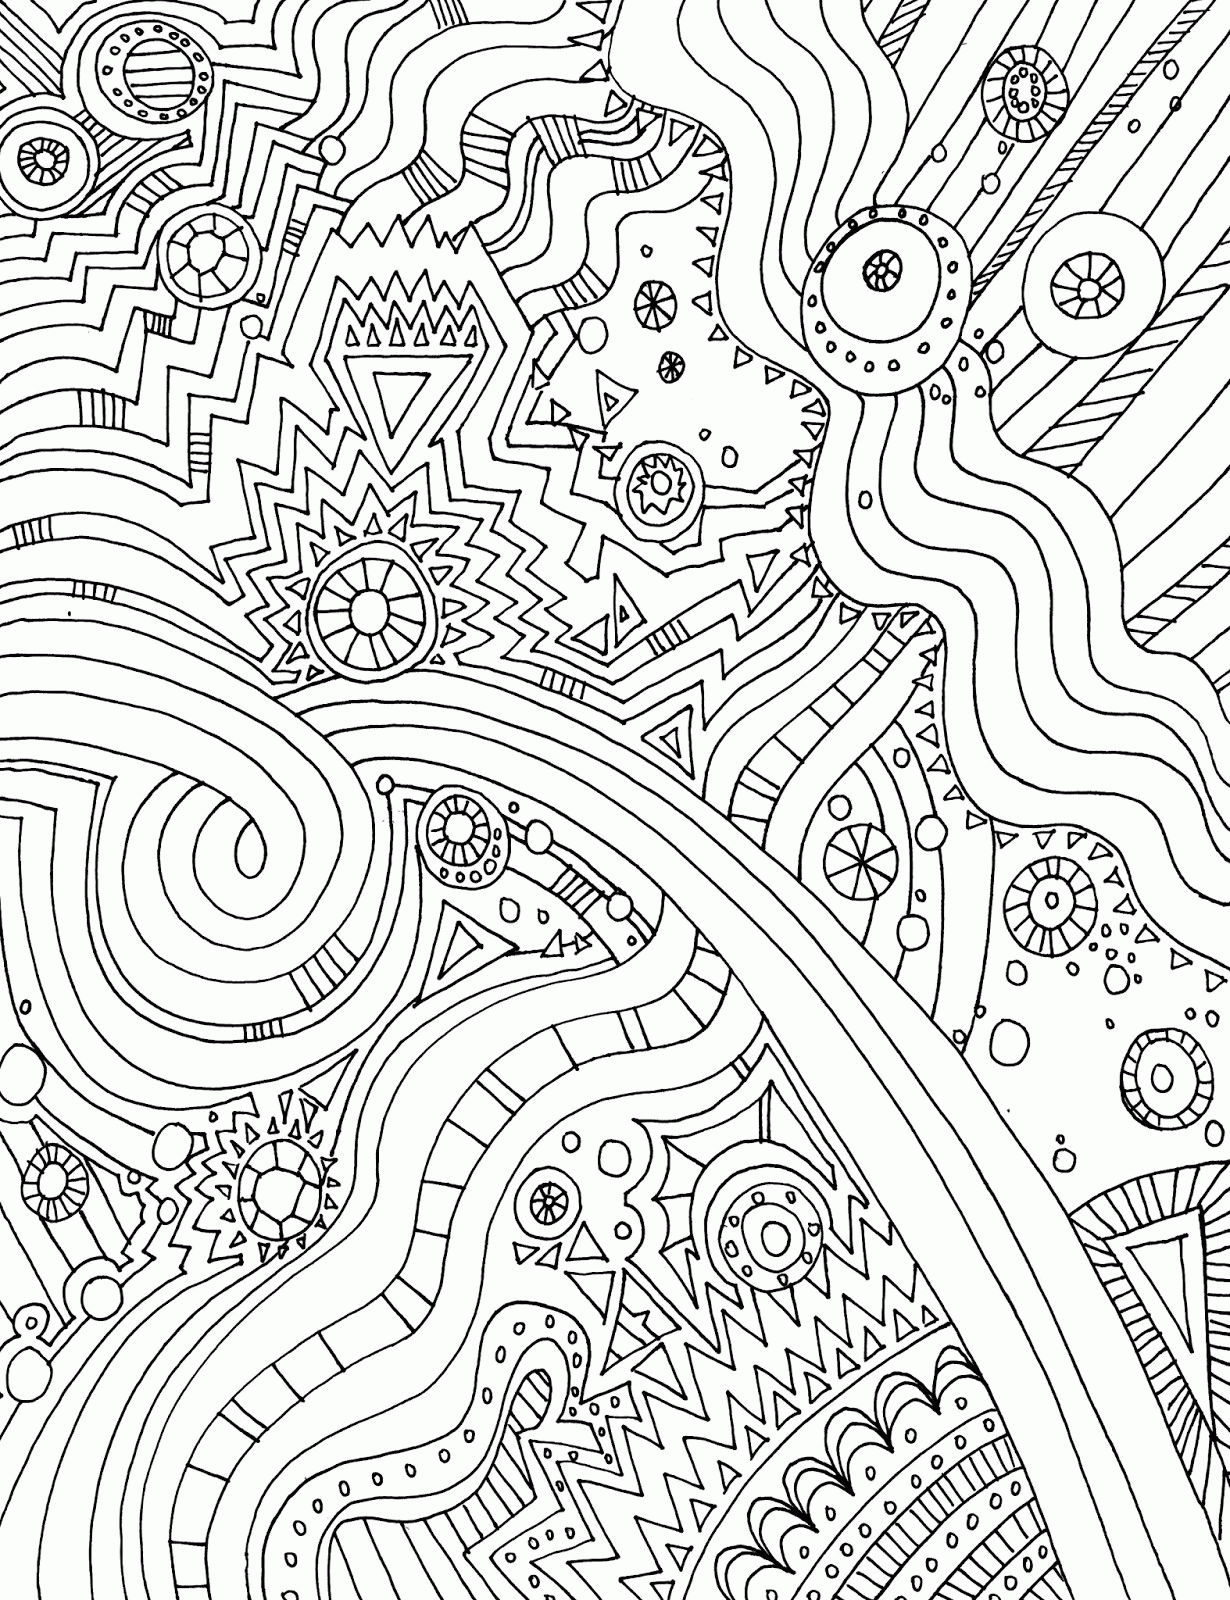 super-hard-abstract-coloring-pages-for-adults-4.jpg